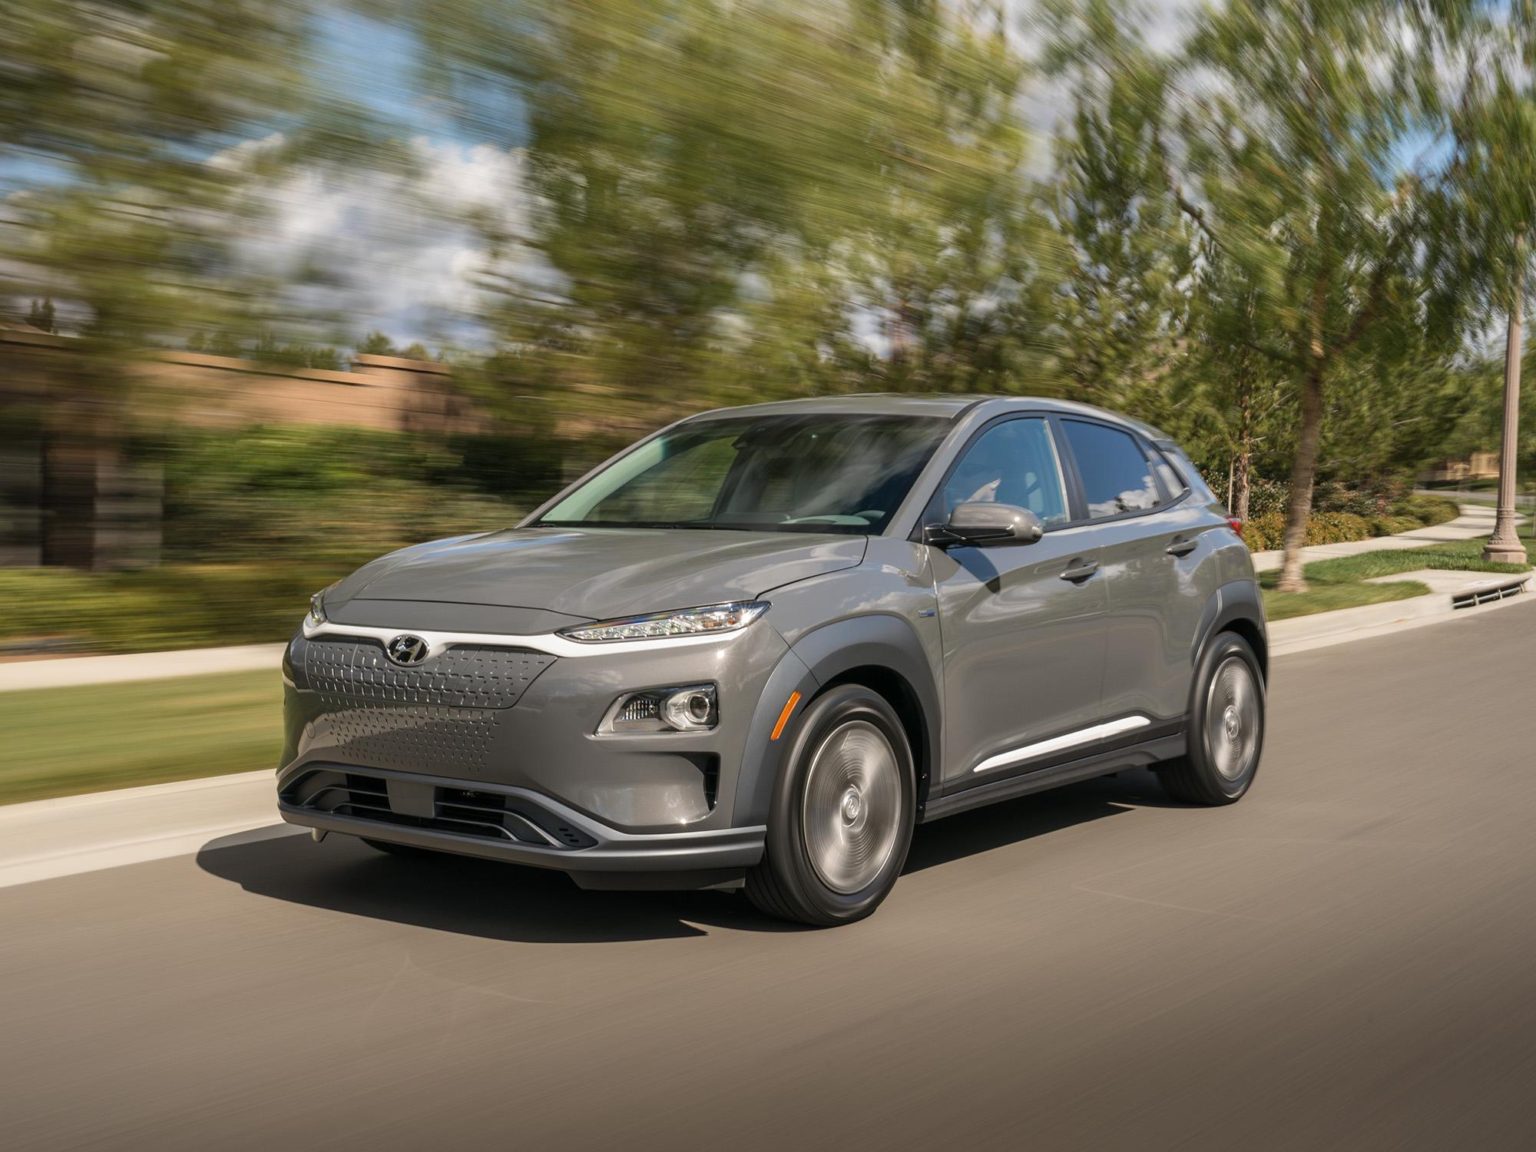 The Hyundai Kona Electric is a proper EV that doesn't try too hard.